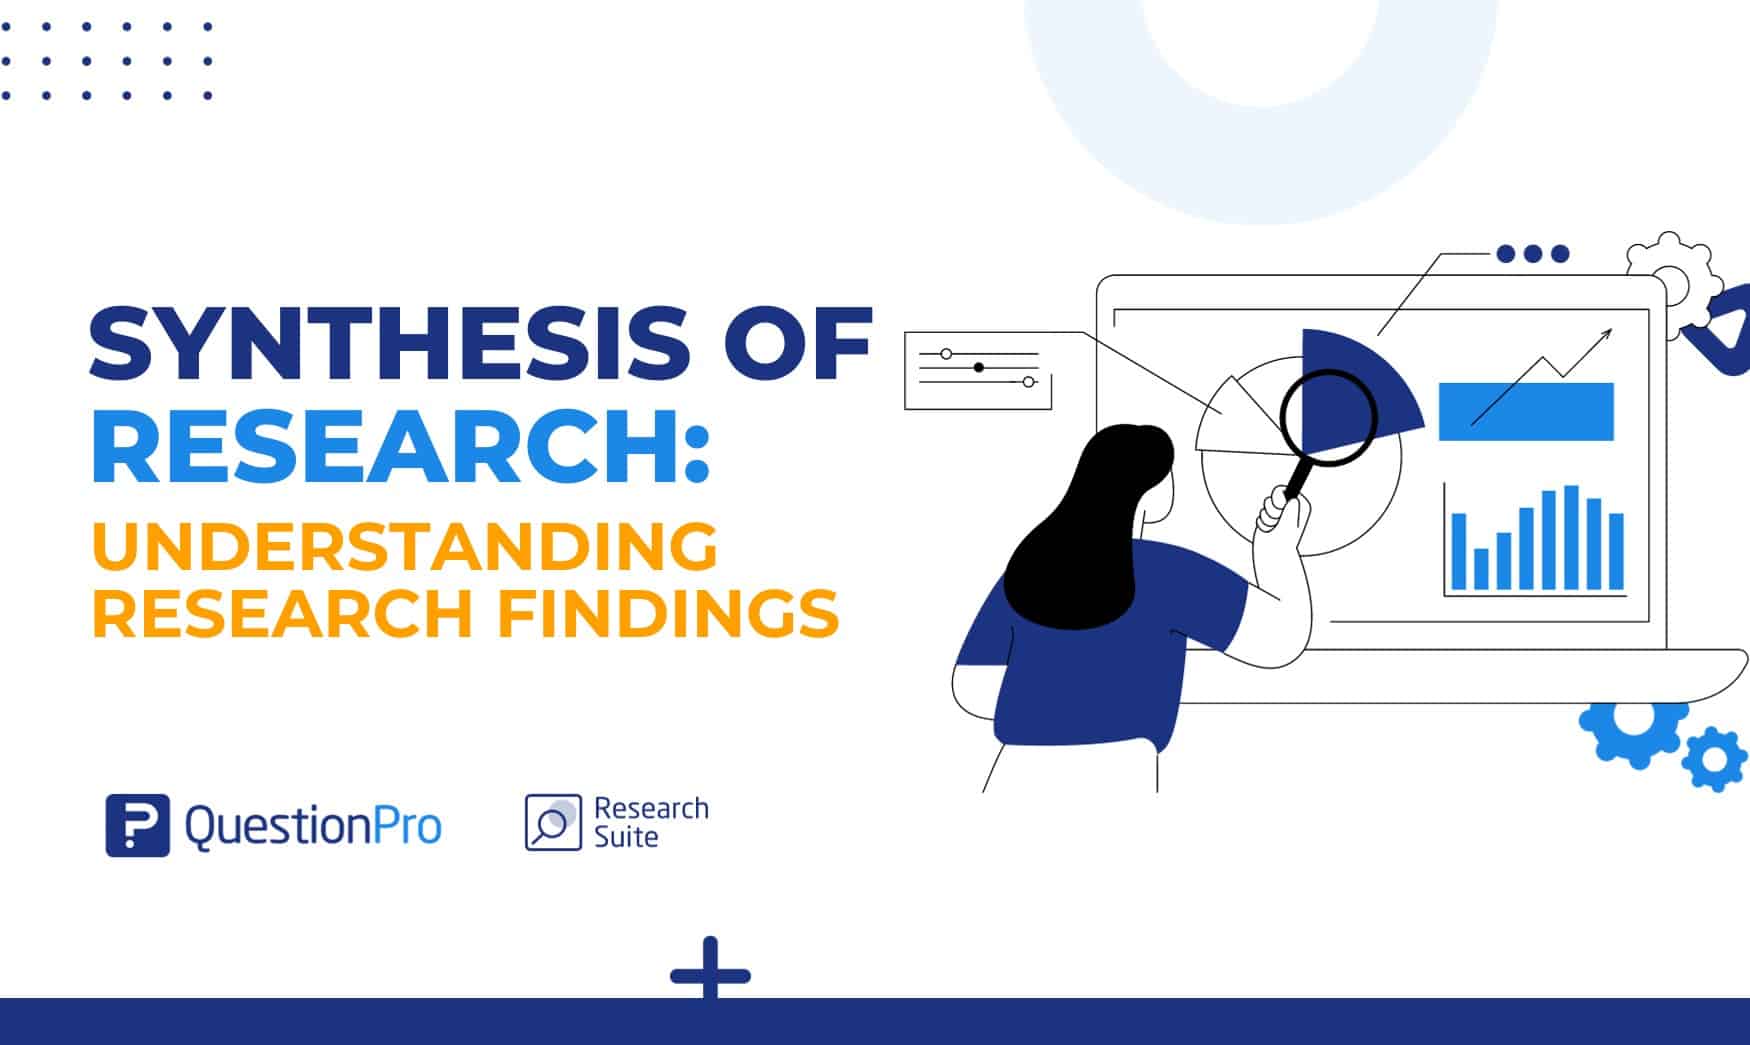 The synthesis of research involves synthesizing information from multiple sources about a topic. Learn the key techniques for your research.